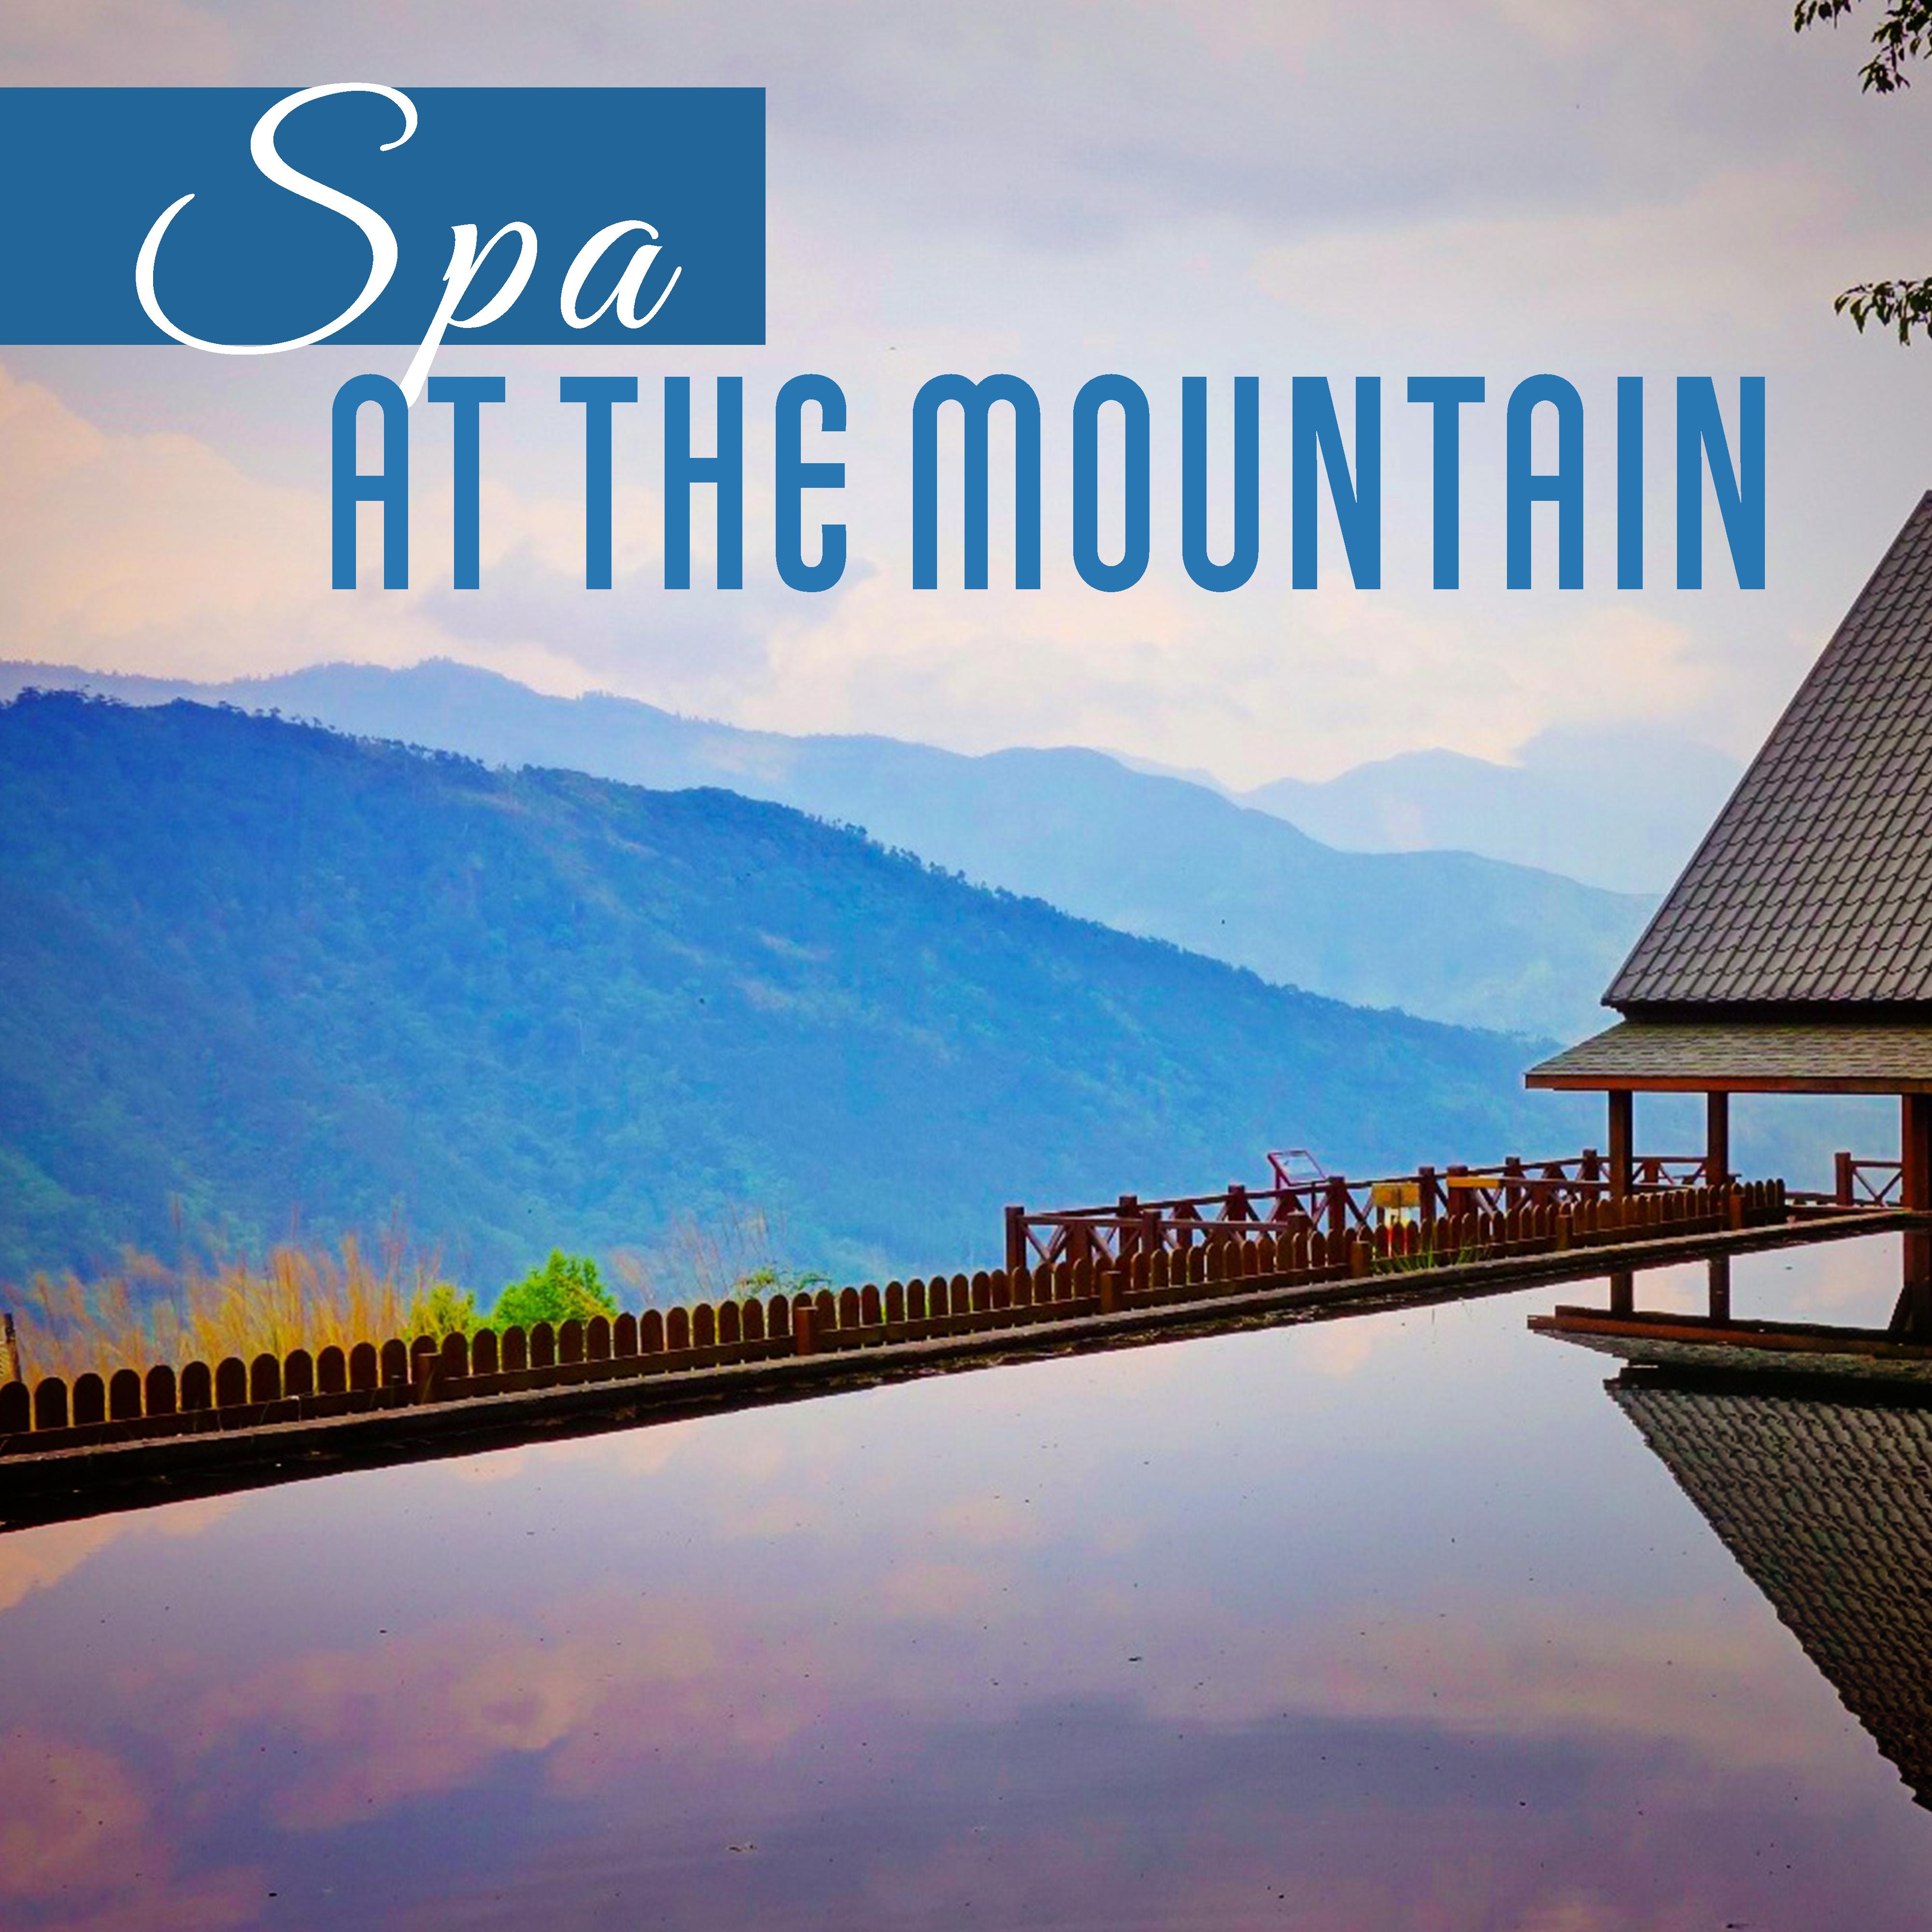 Spa at the Mountain – New Age Music for Hotel Spa, Wellness, Massage, Relaxation, Pure Spa